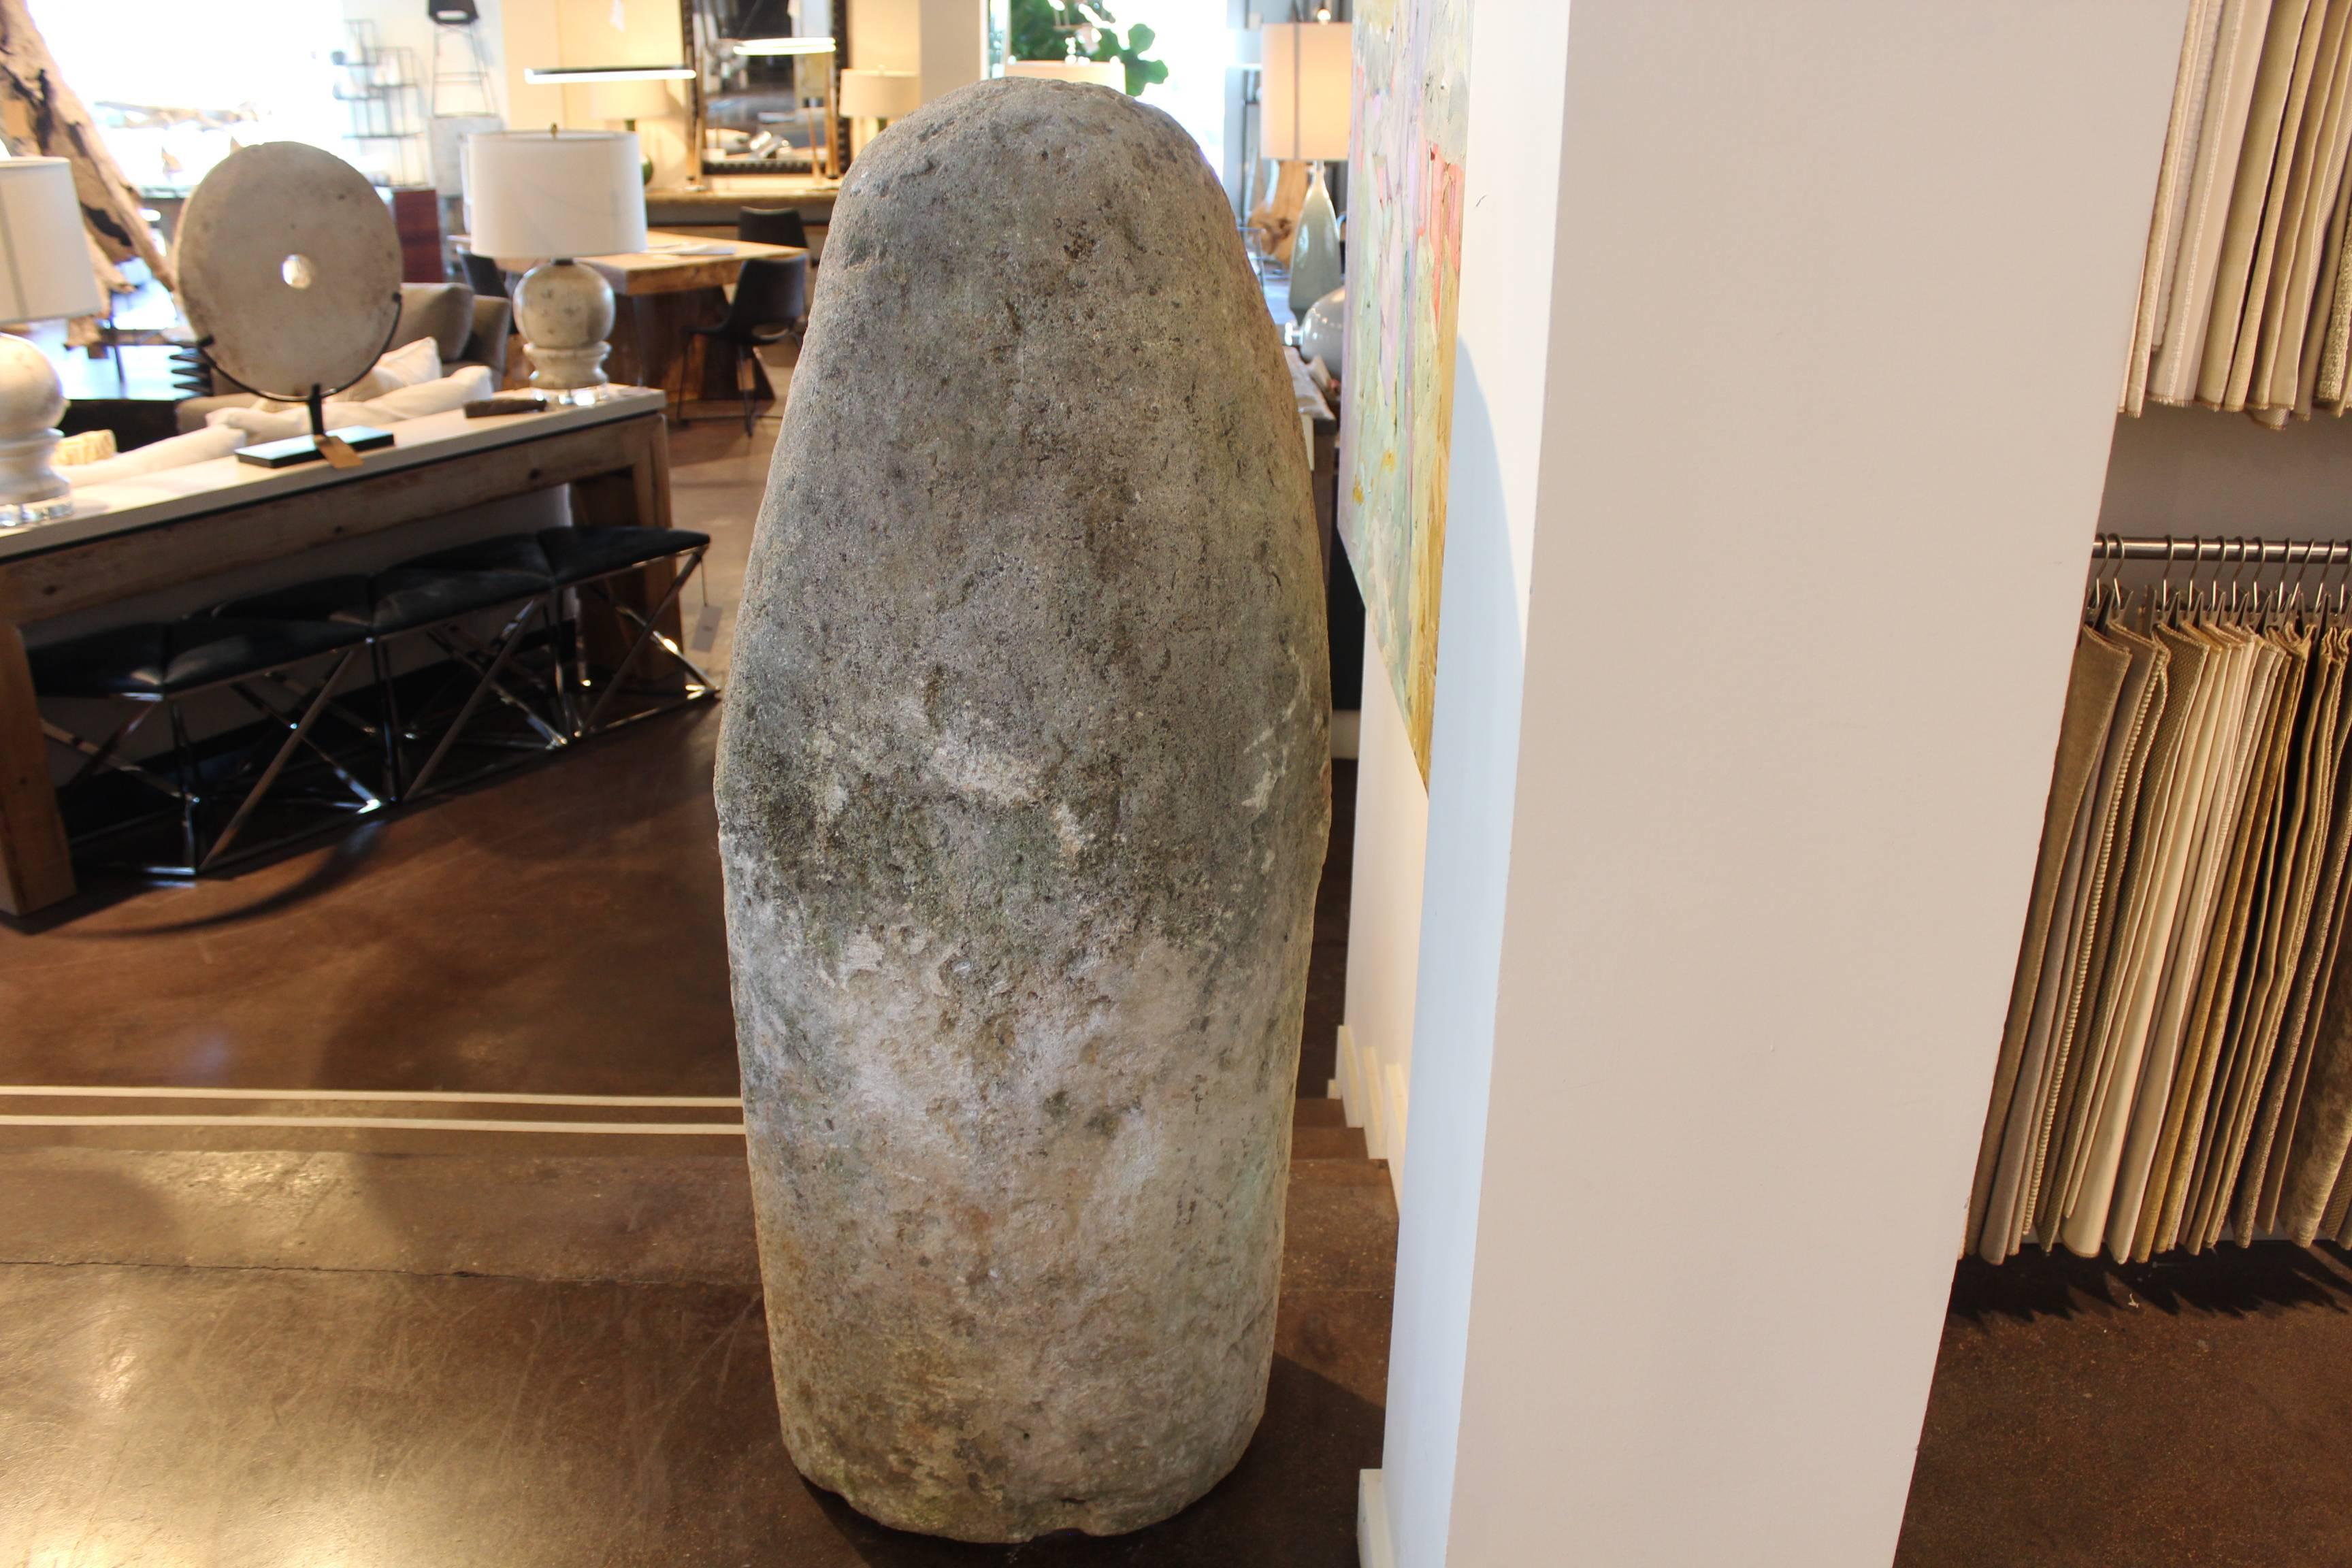 Roman milestone rendered in limestone
Presumeably from the Roman Region of Gallia Narbonensis, which is now Southwestern, France where it was purchased.
650 Lbs.